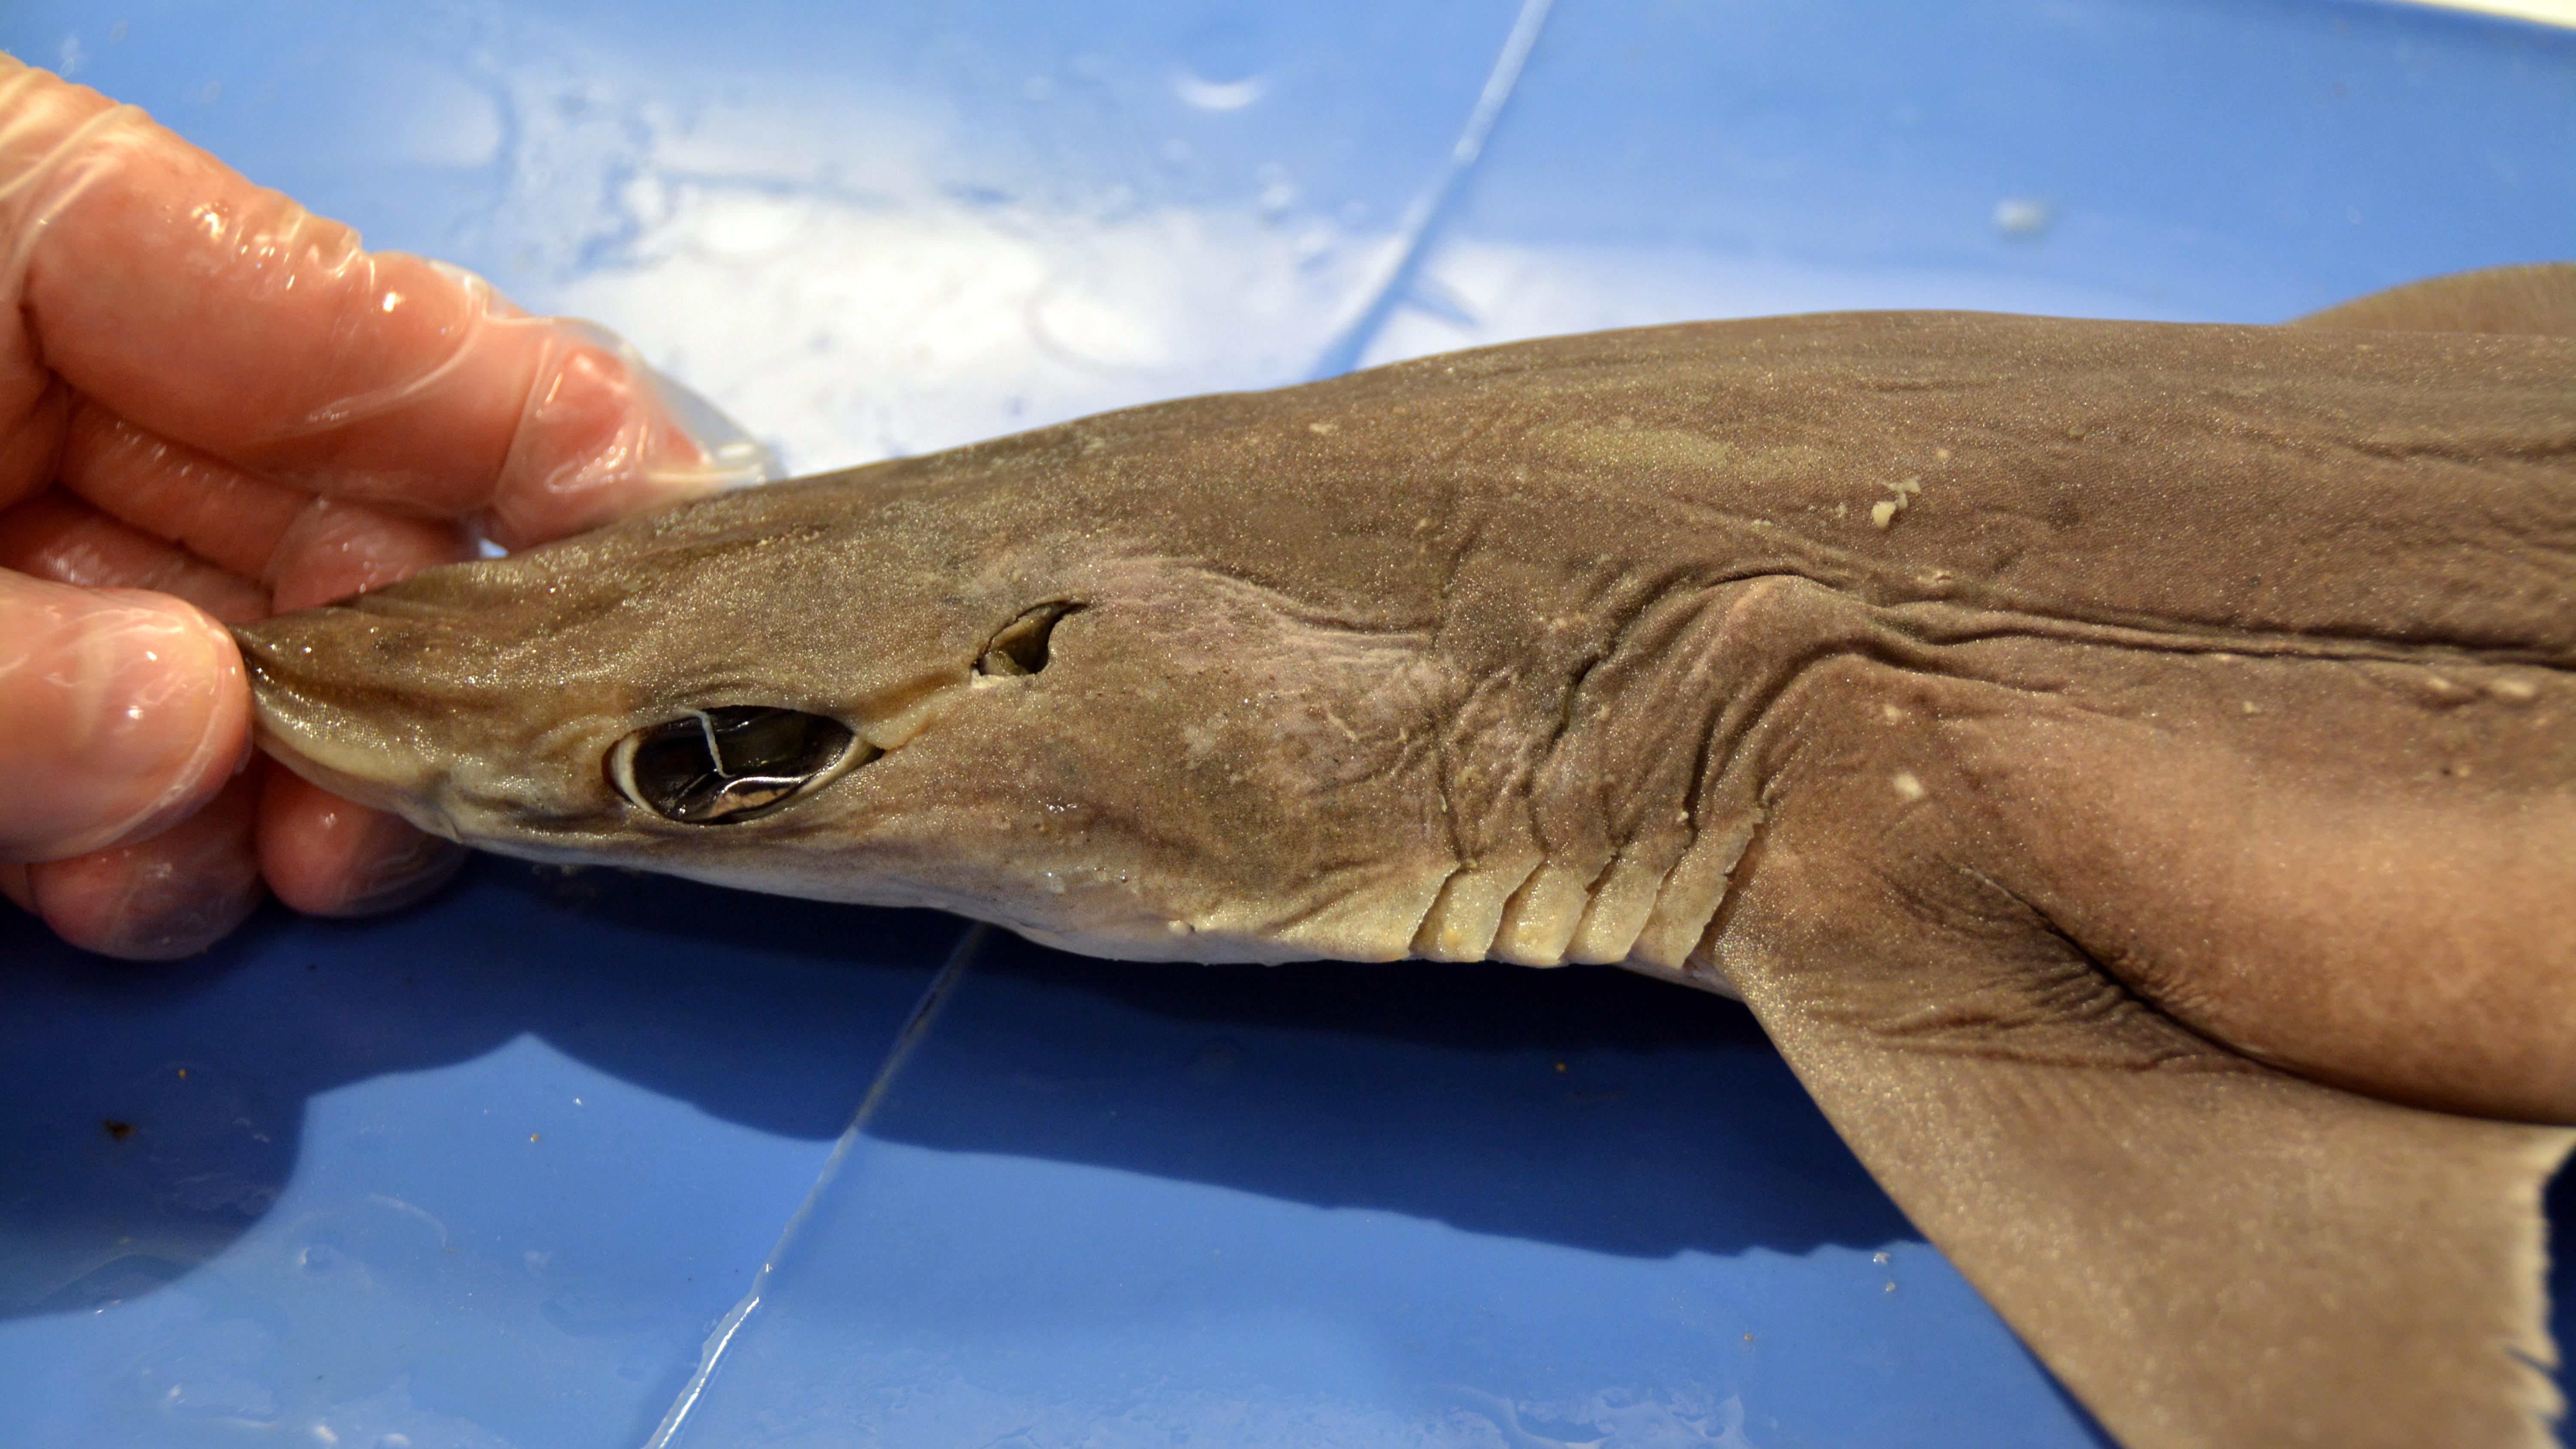 dissection-101-dogfish-shark-dissection-video-part-1-of-2-exterior-pbs-learningmedia